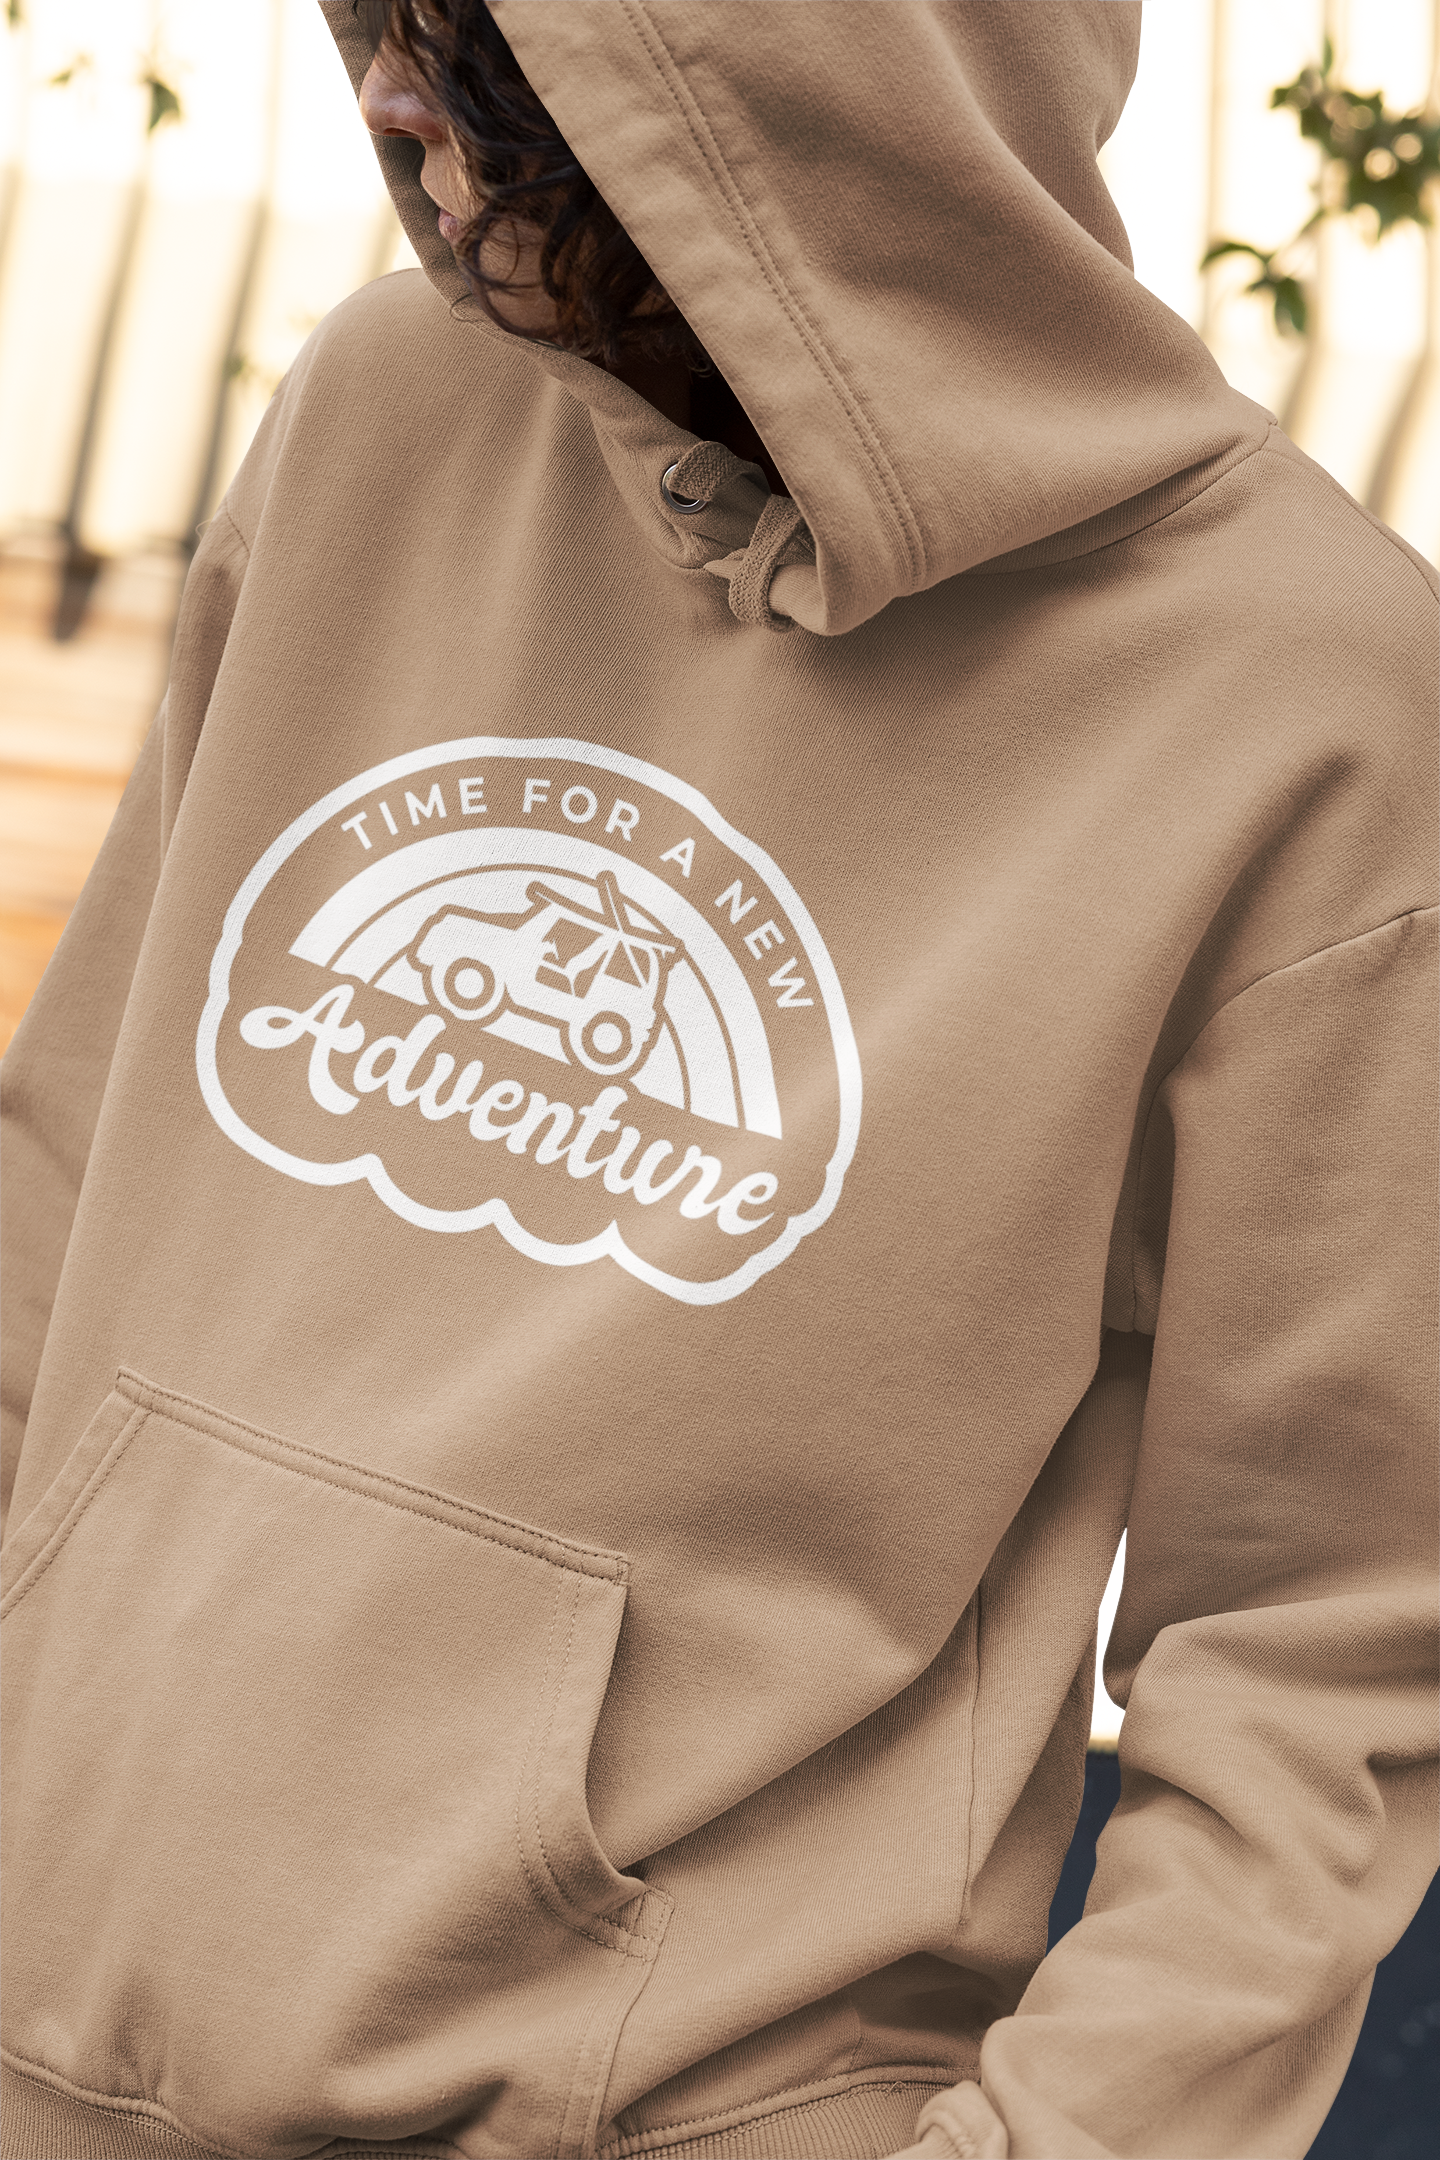 Time For A New Adventure Hooded Sweatshirt. Design is in a cloud bubble with time for a new adventure at the top curved with an off road vehicle in the middle with a rainbow behind it, and adventure below it. This the design in a white on the sandstone tan hoodie. This is a stylized up close shot of the design on the sweatshirt on a model looking opposite from the camera.